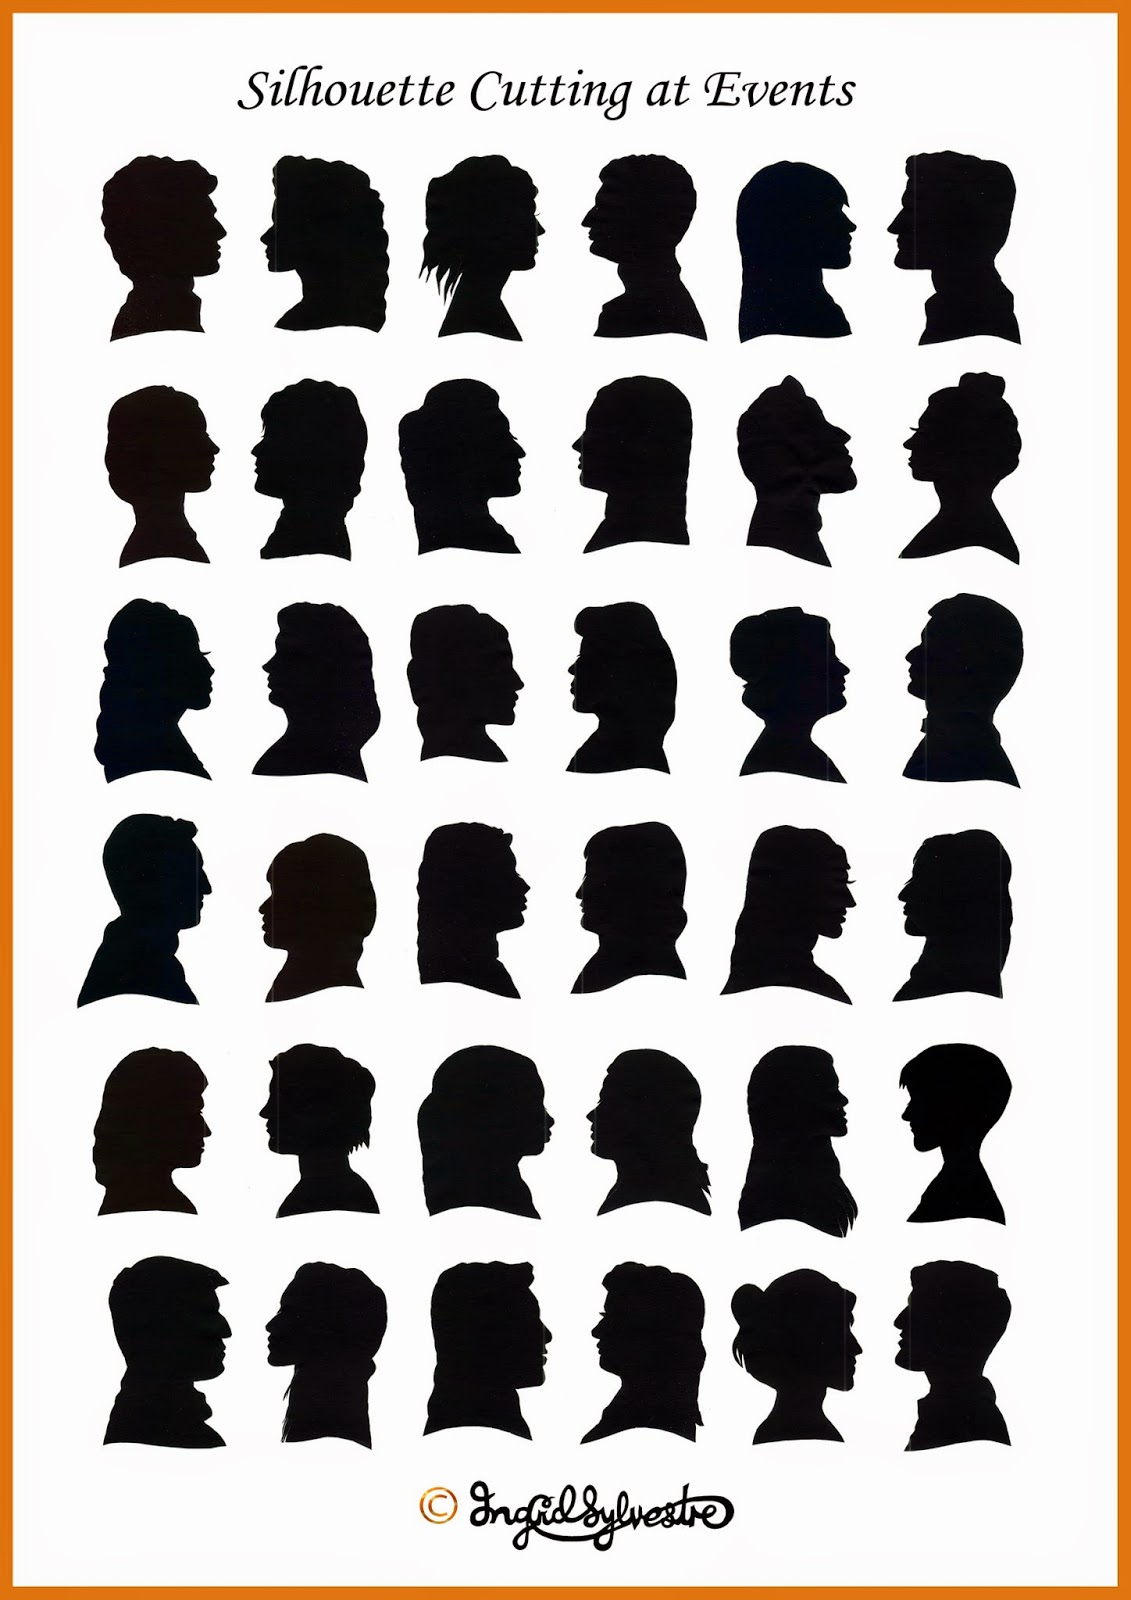 Silhouettes cut by UK silhouette artist - shadow cutter Ingrid Sylvestre, weddings, parties, proms, corporate events